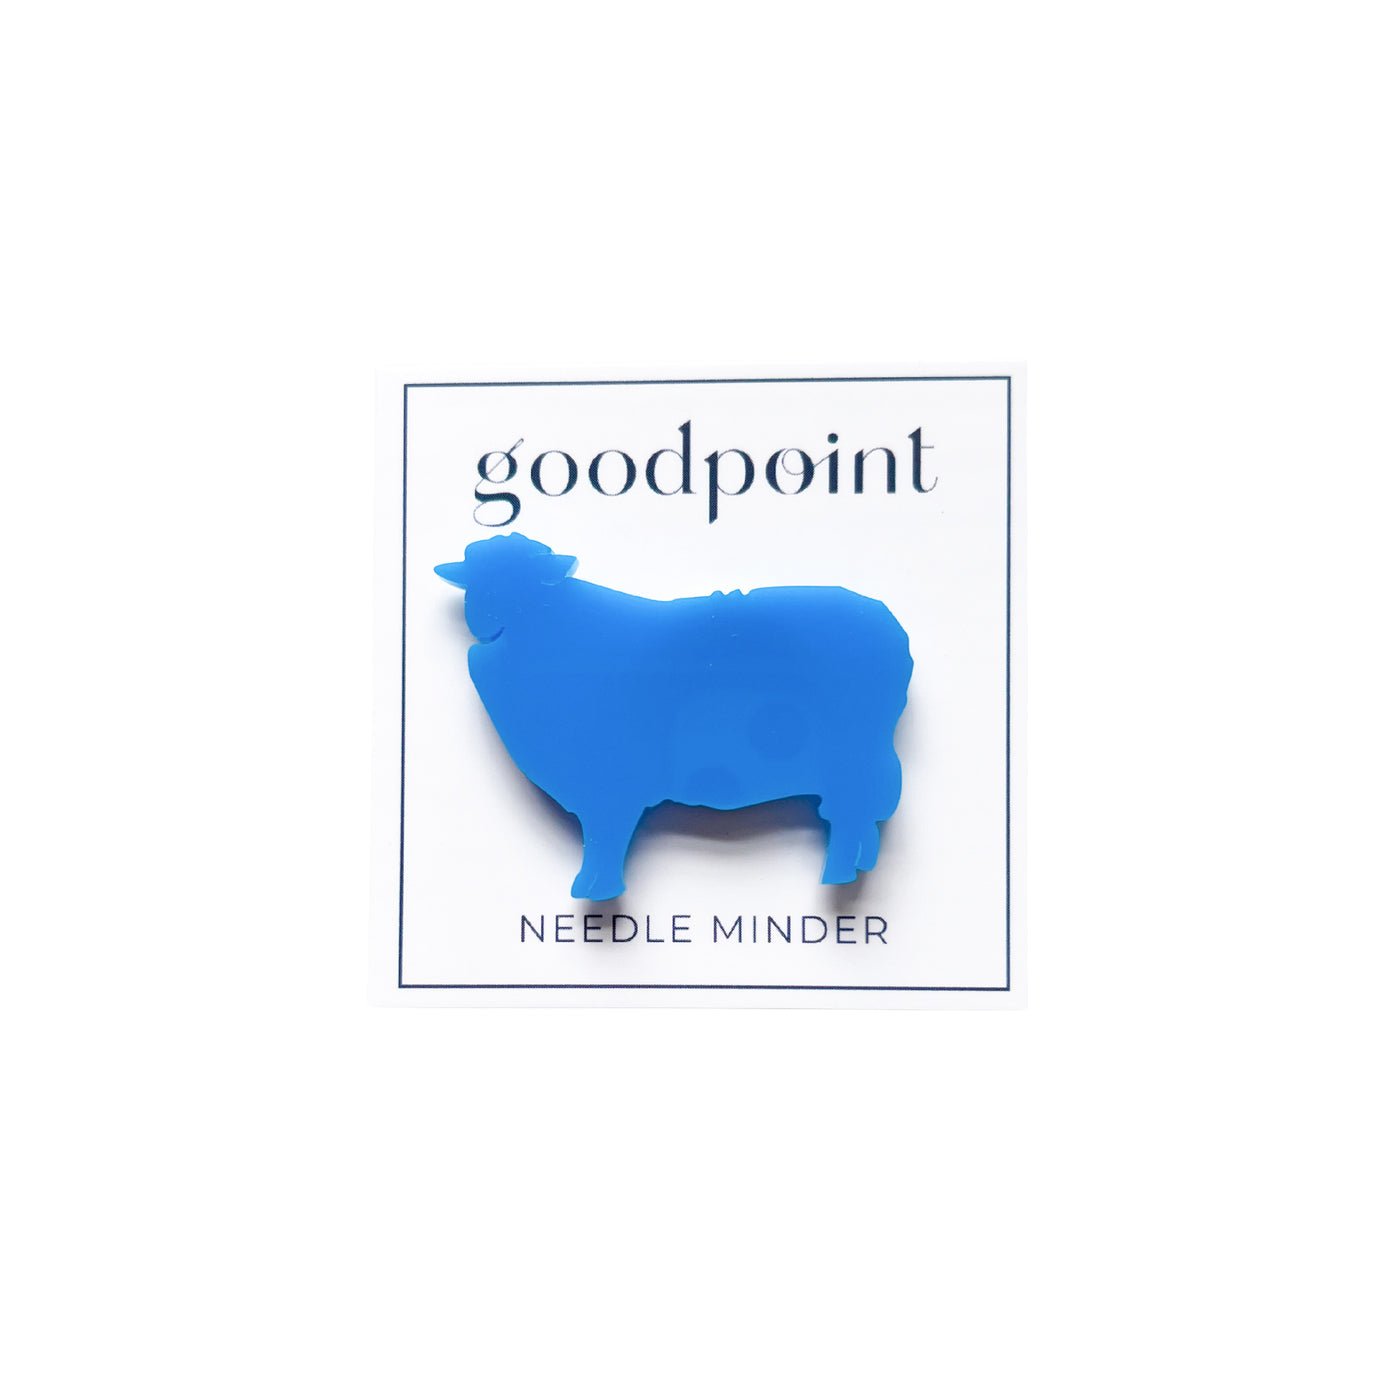 White card stock with the Goodpoint logo holds a blue acrylic needle minder shaped like a sheep